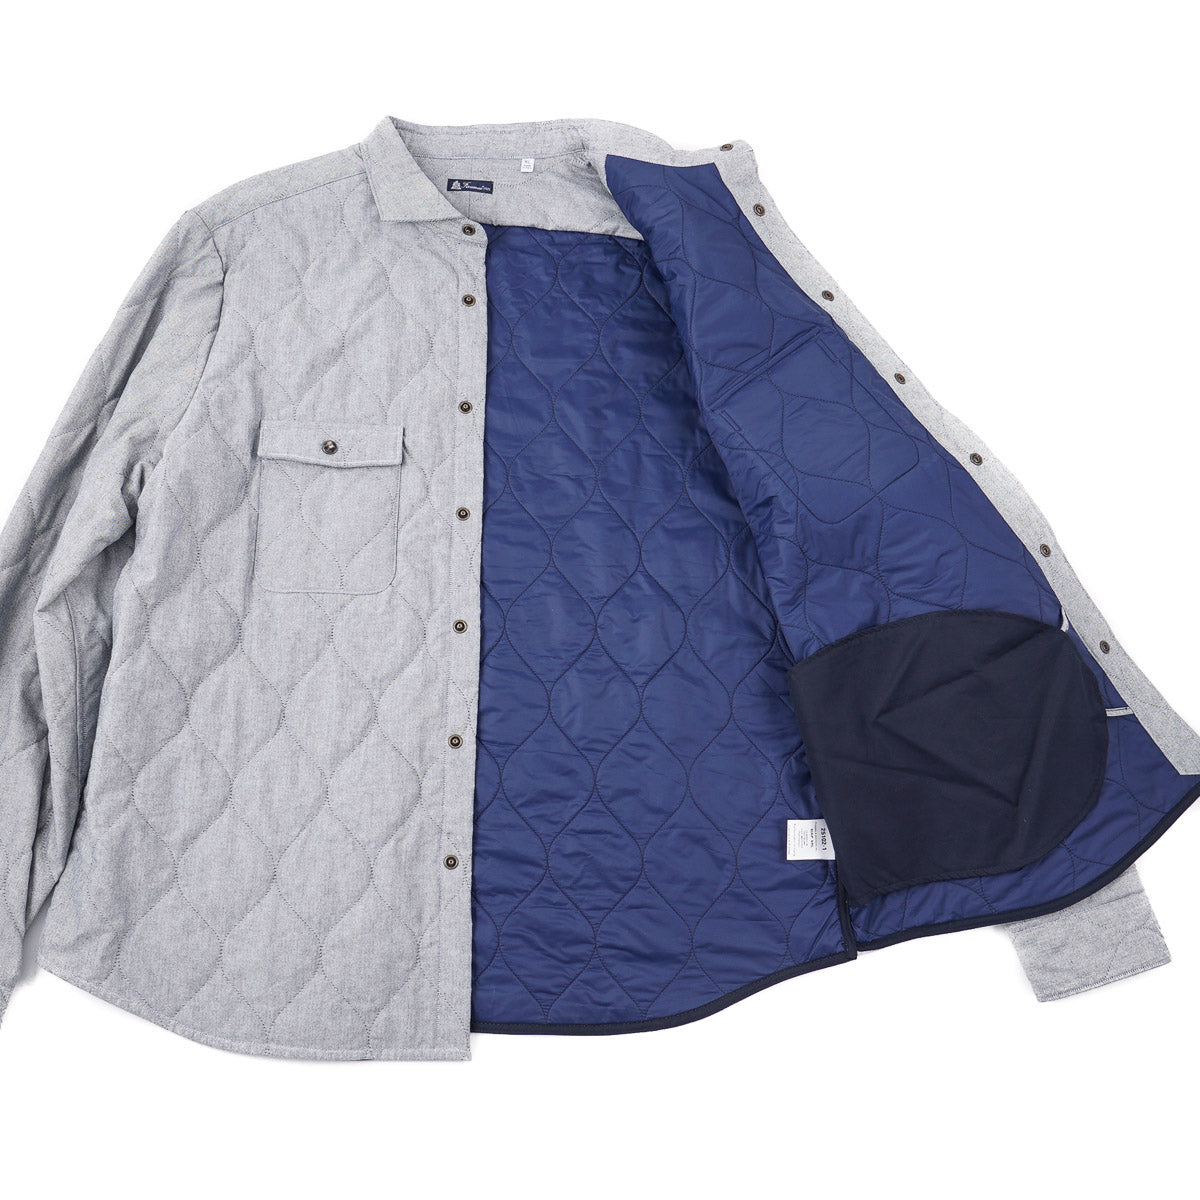 Finamore Quilted Cotton Shirt-Jacket - Top Shelf Apparel